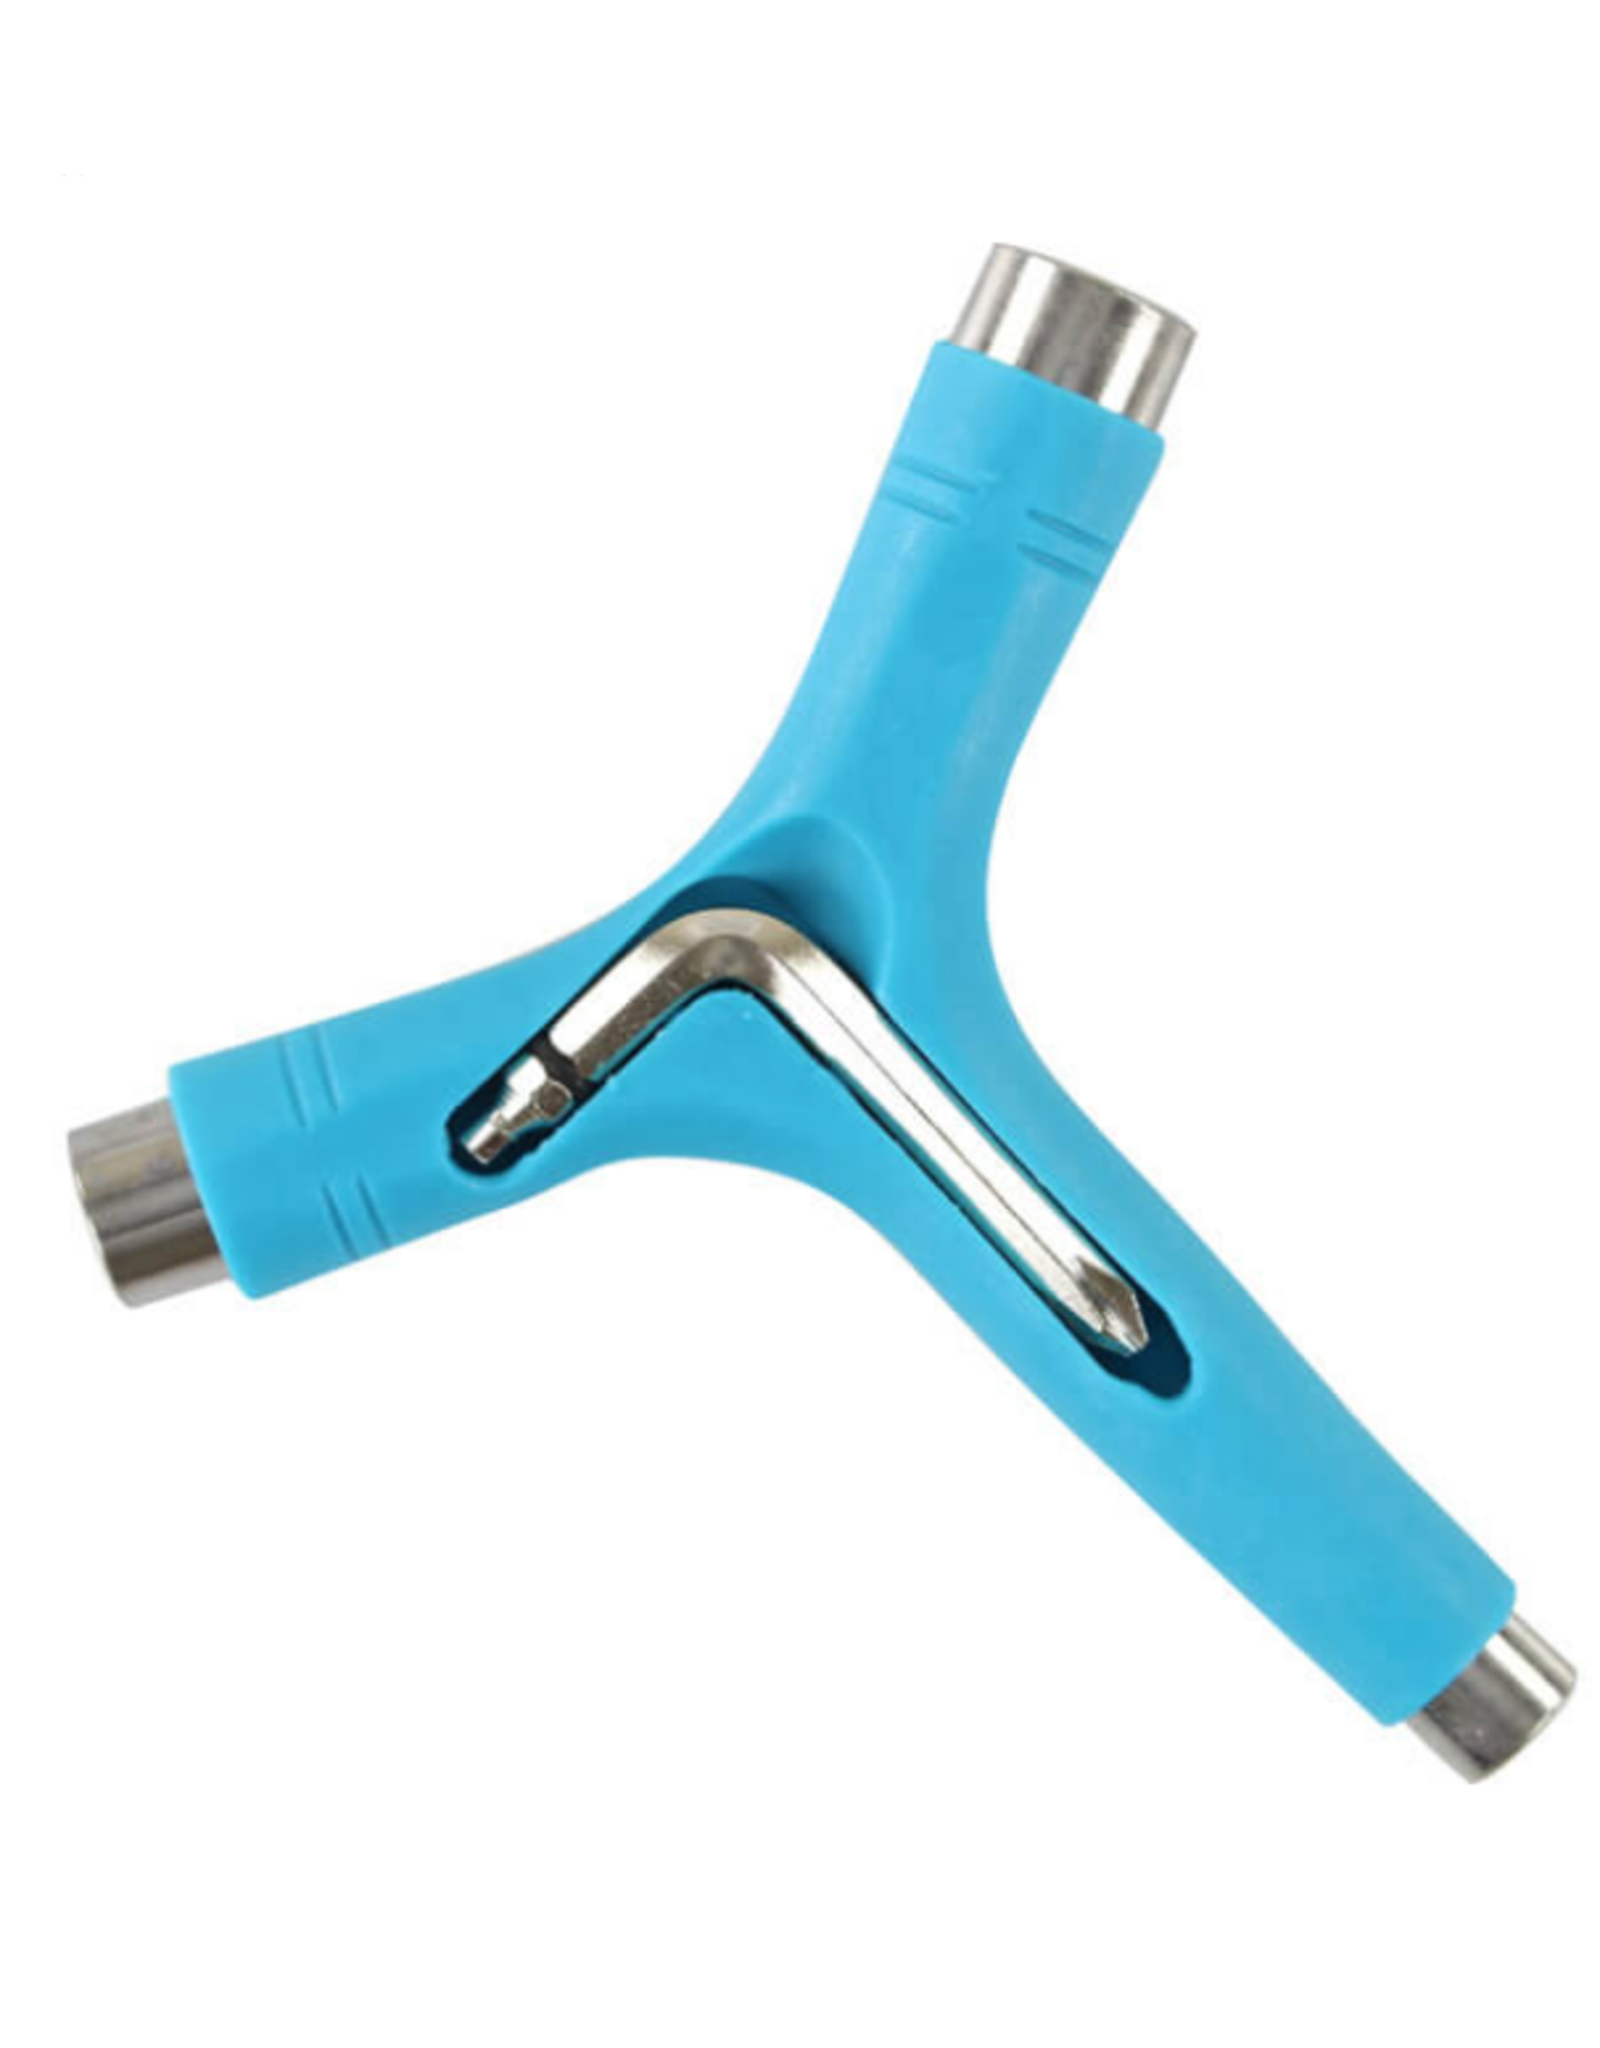 YOCAHER YOCAHER TOOL BABY BLUE